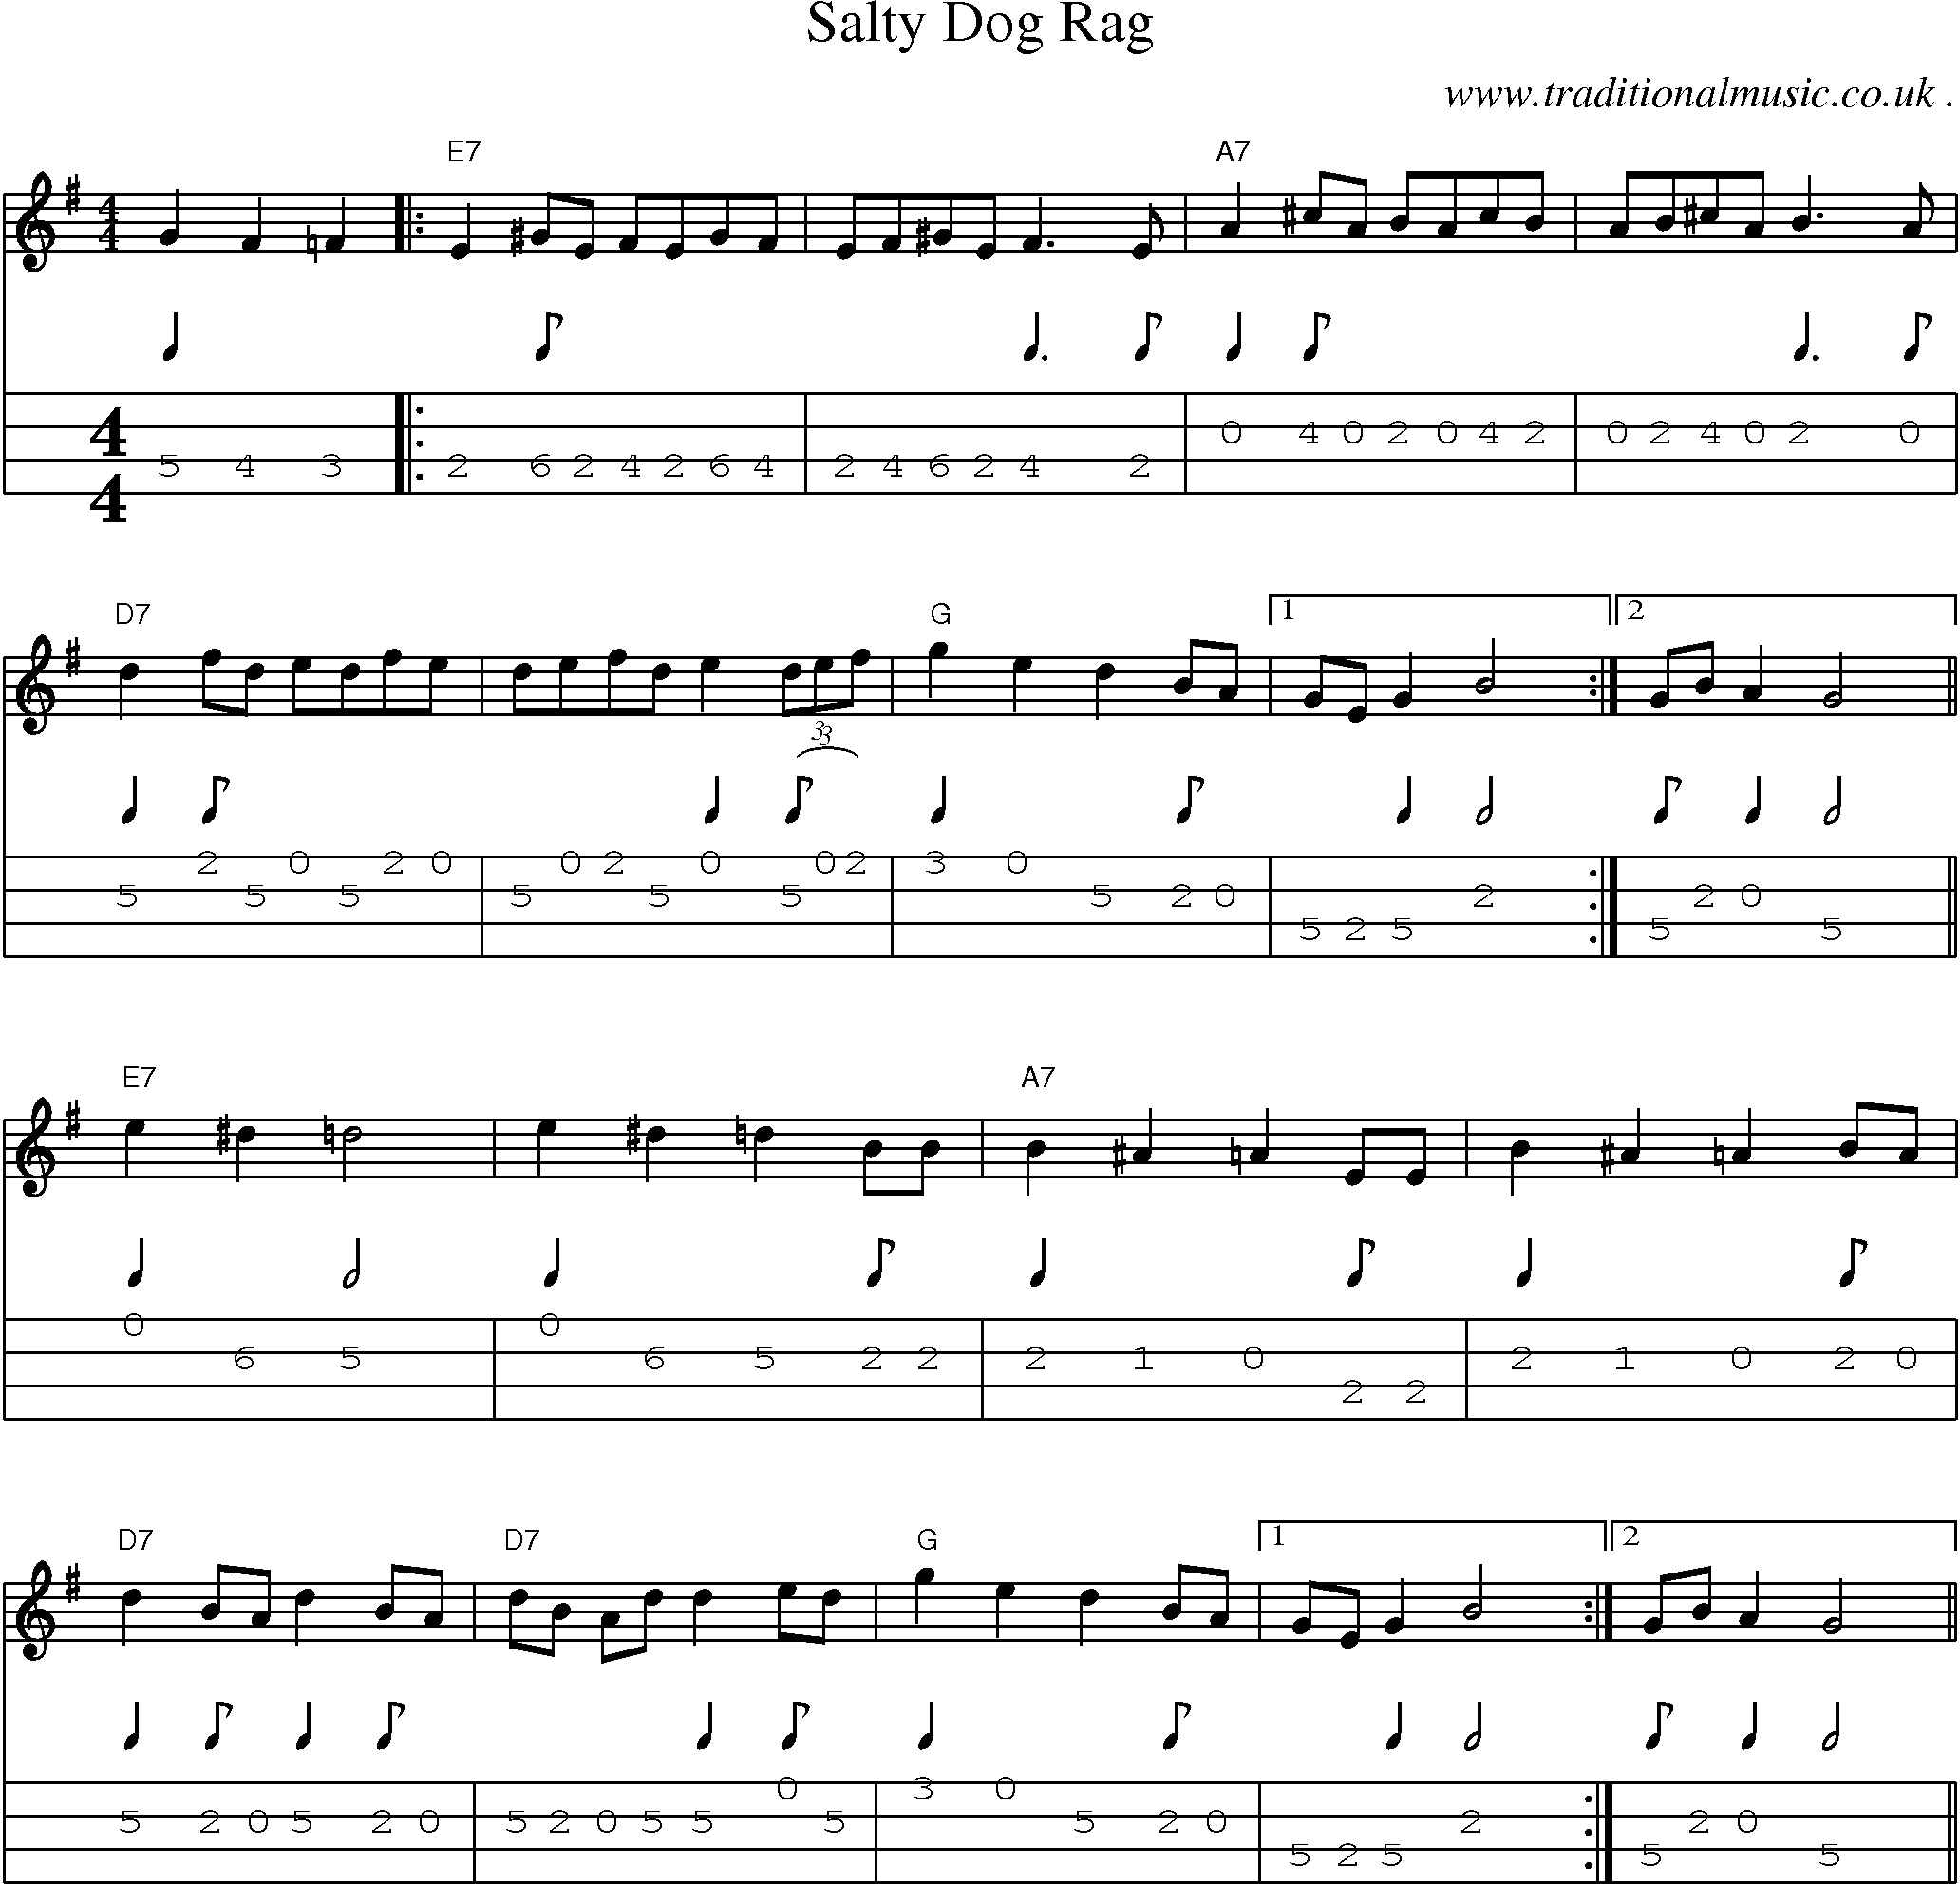 Music Score and Guitar Tabs for Salty Dog Rag